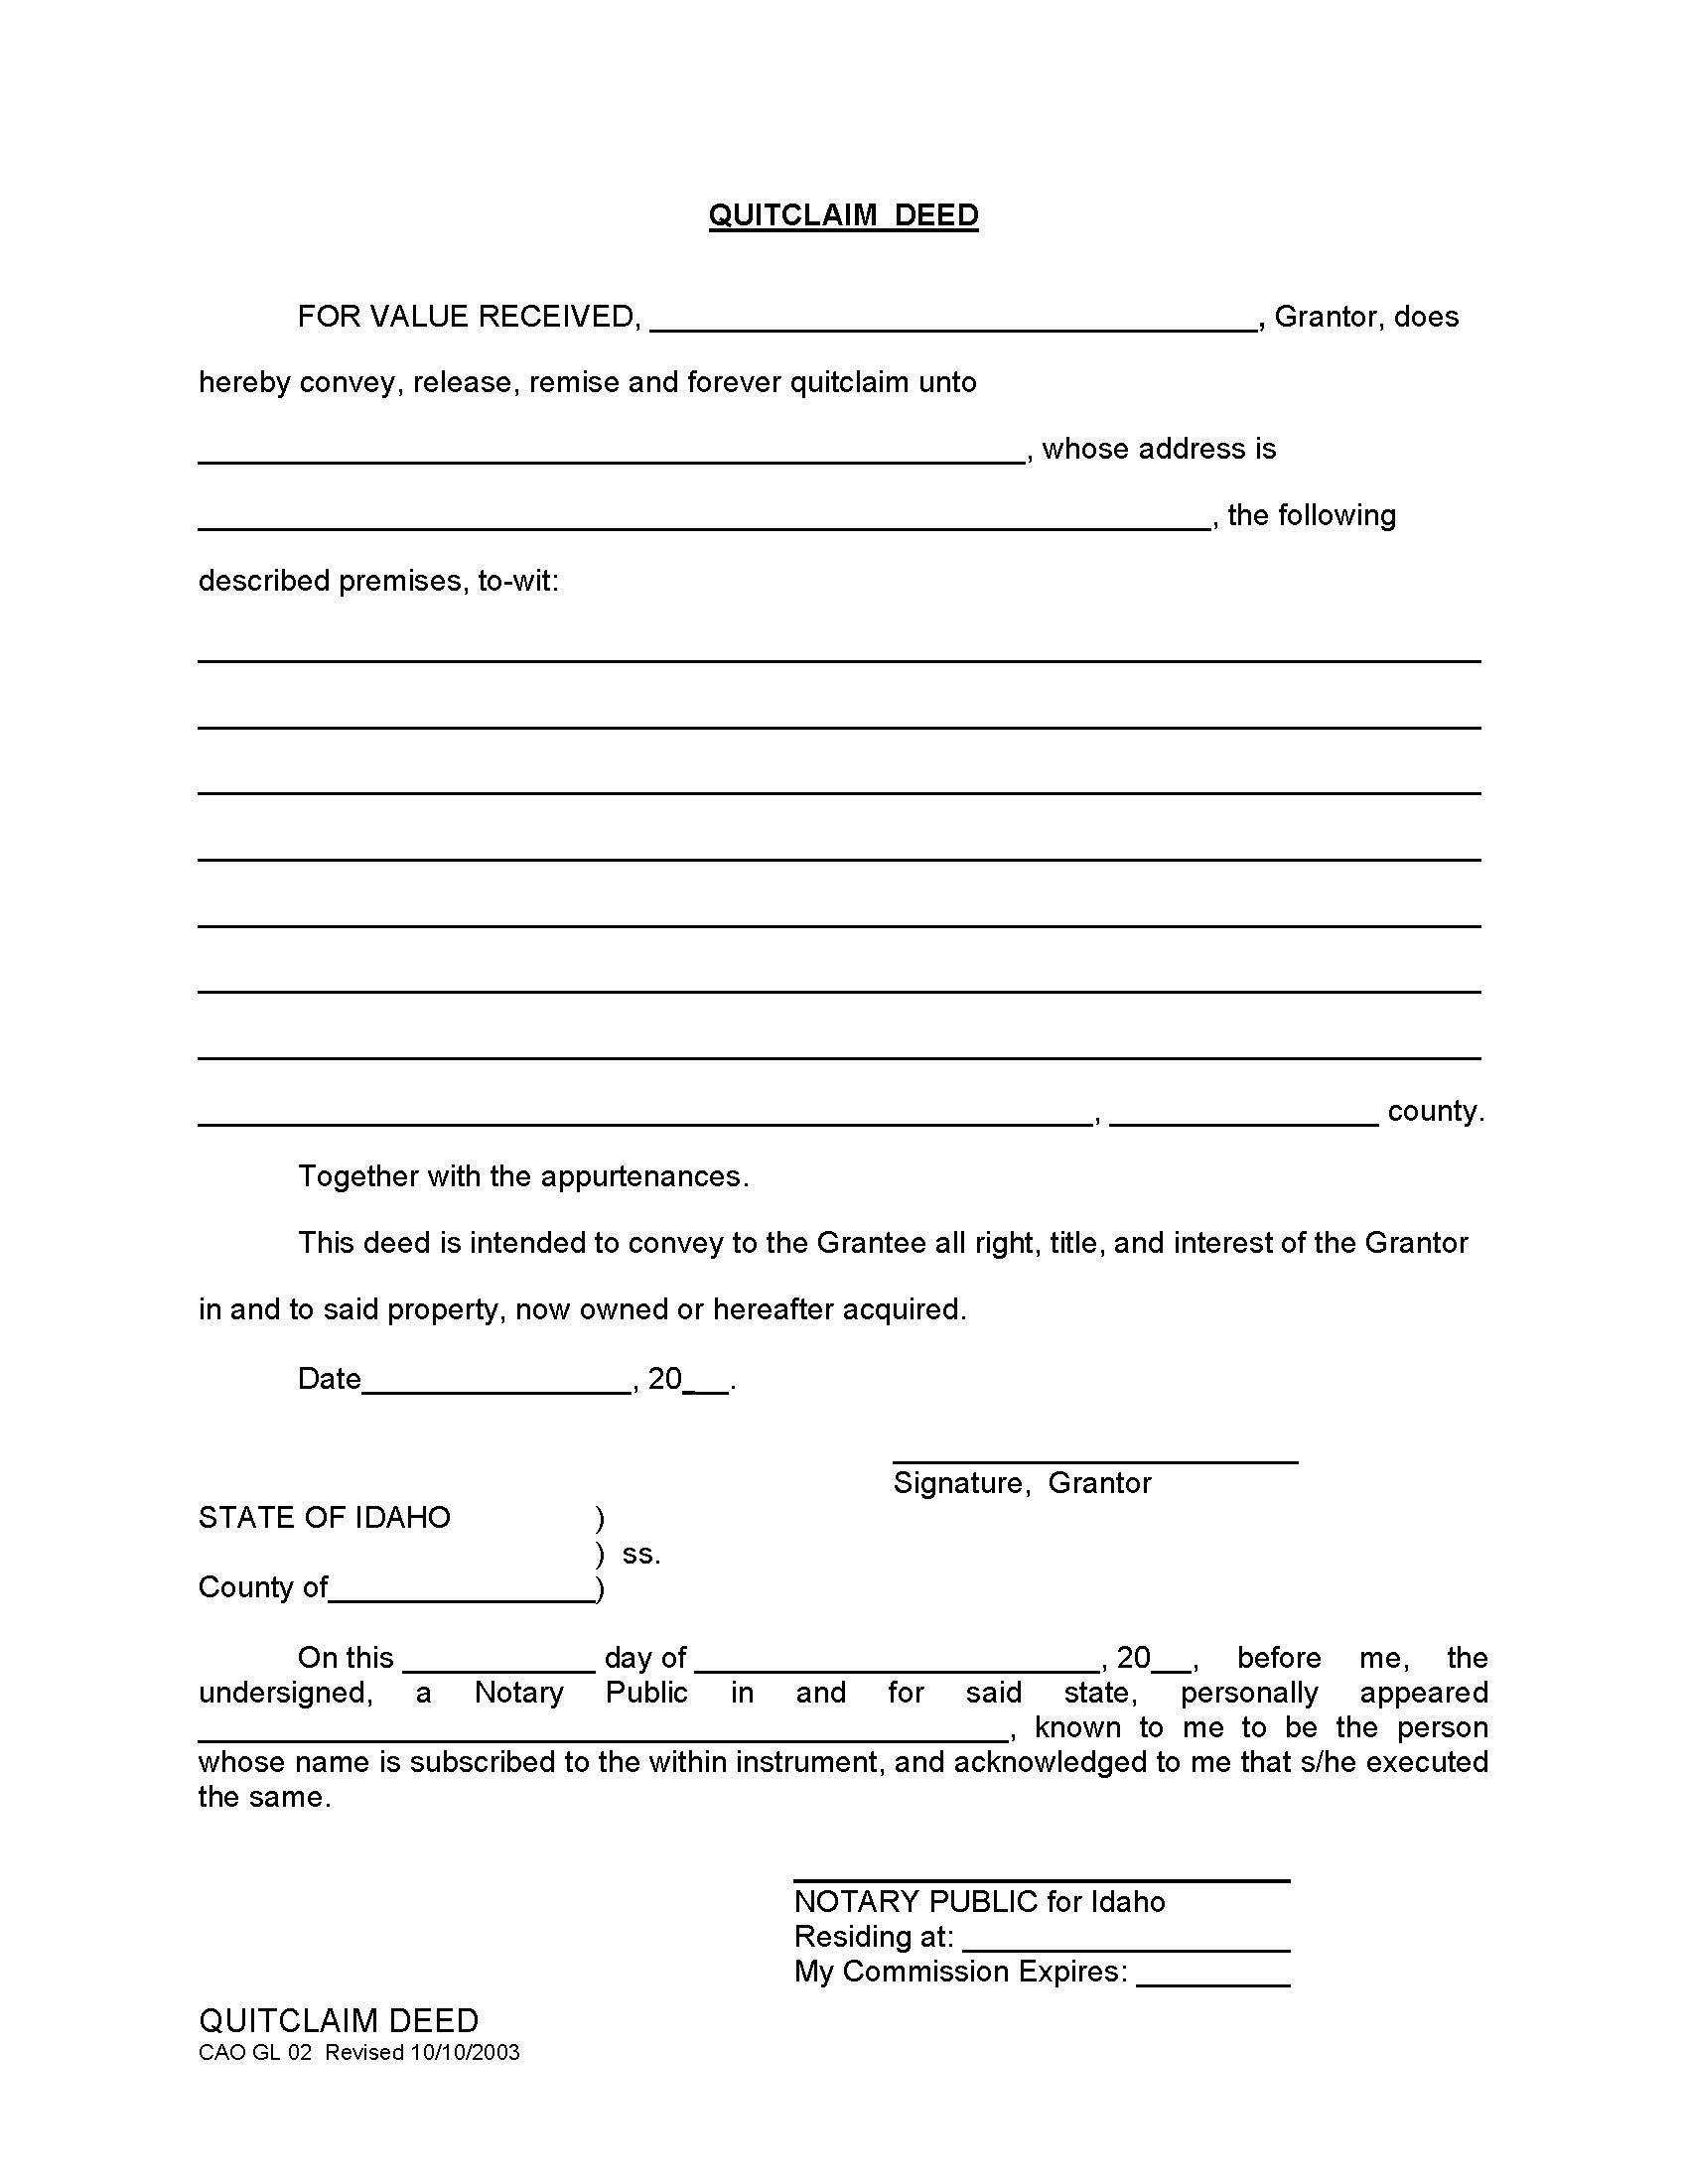 Idaho Quit Claim Deed Form Deed Forms Deed Forms